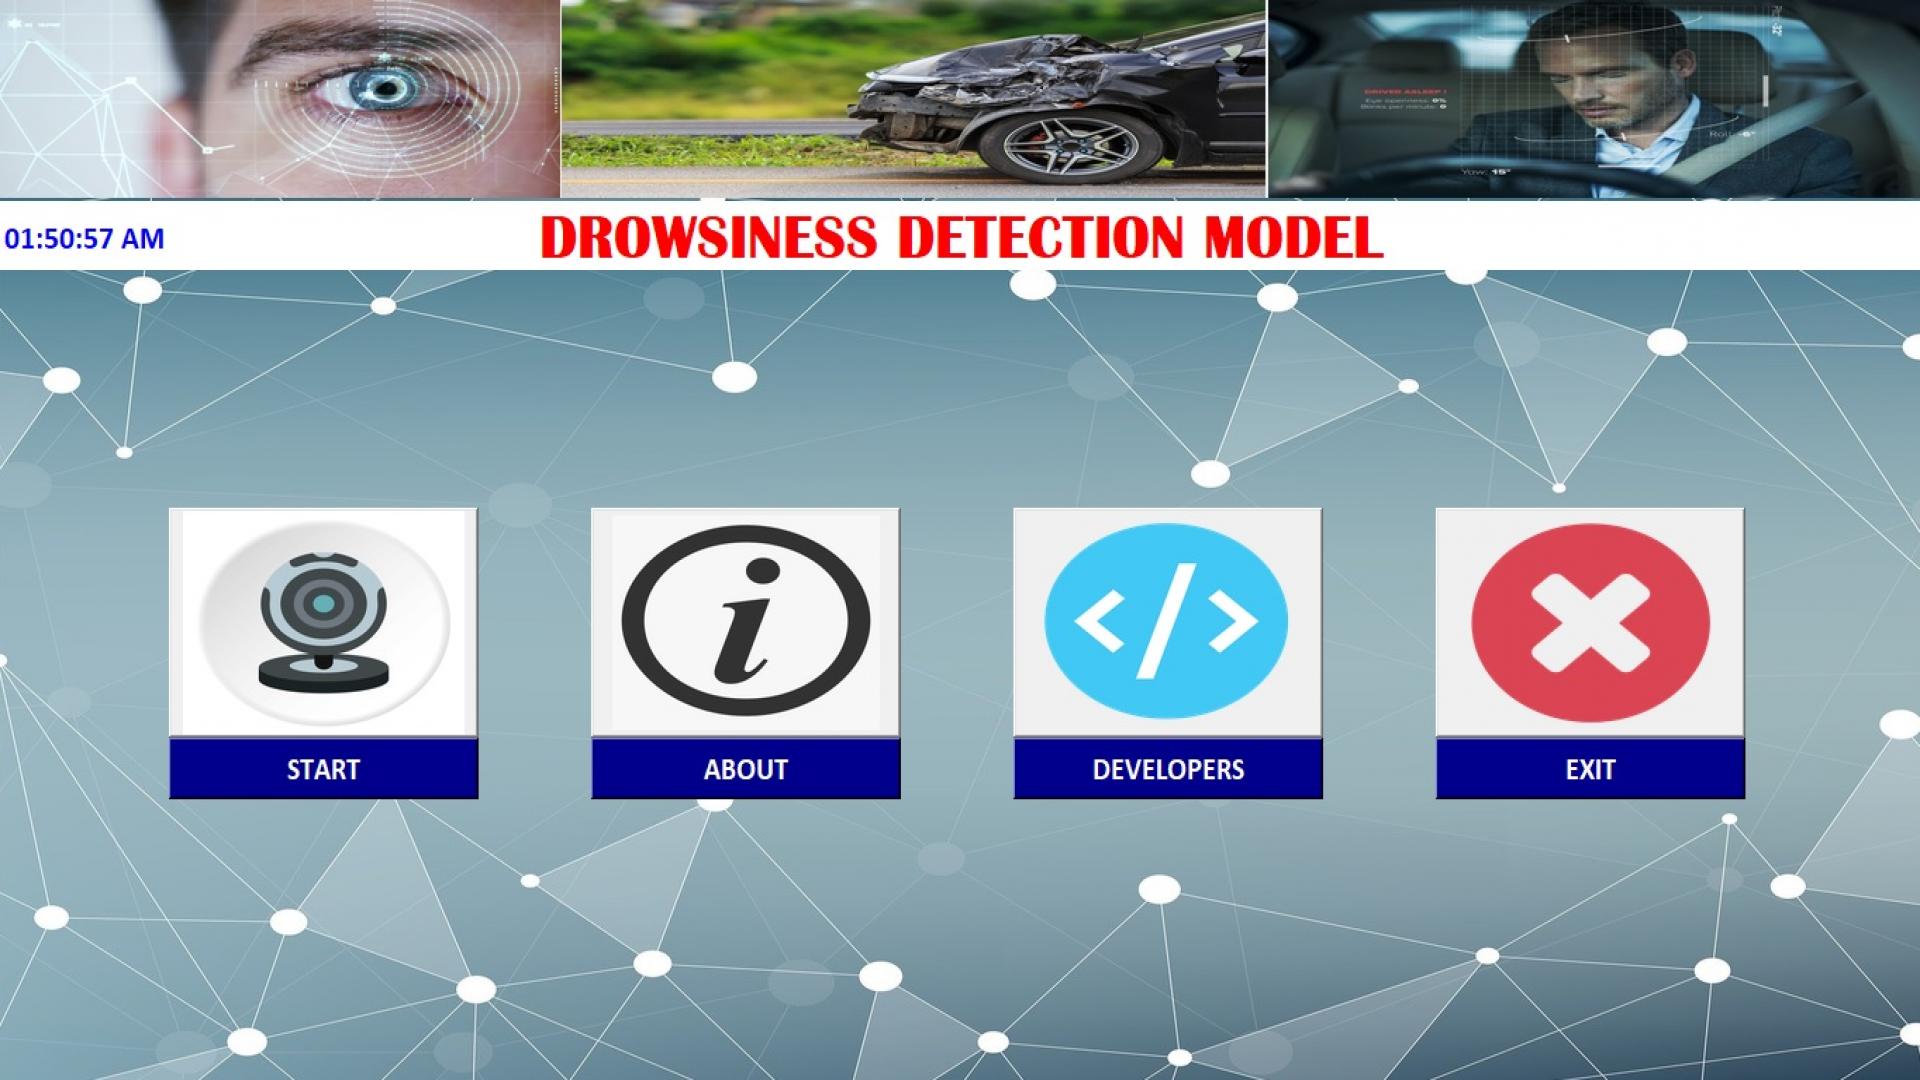 Drowsiness Detection Model